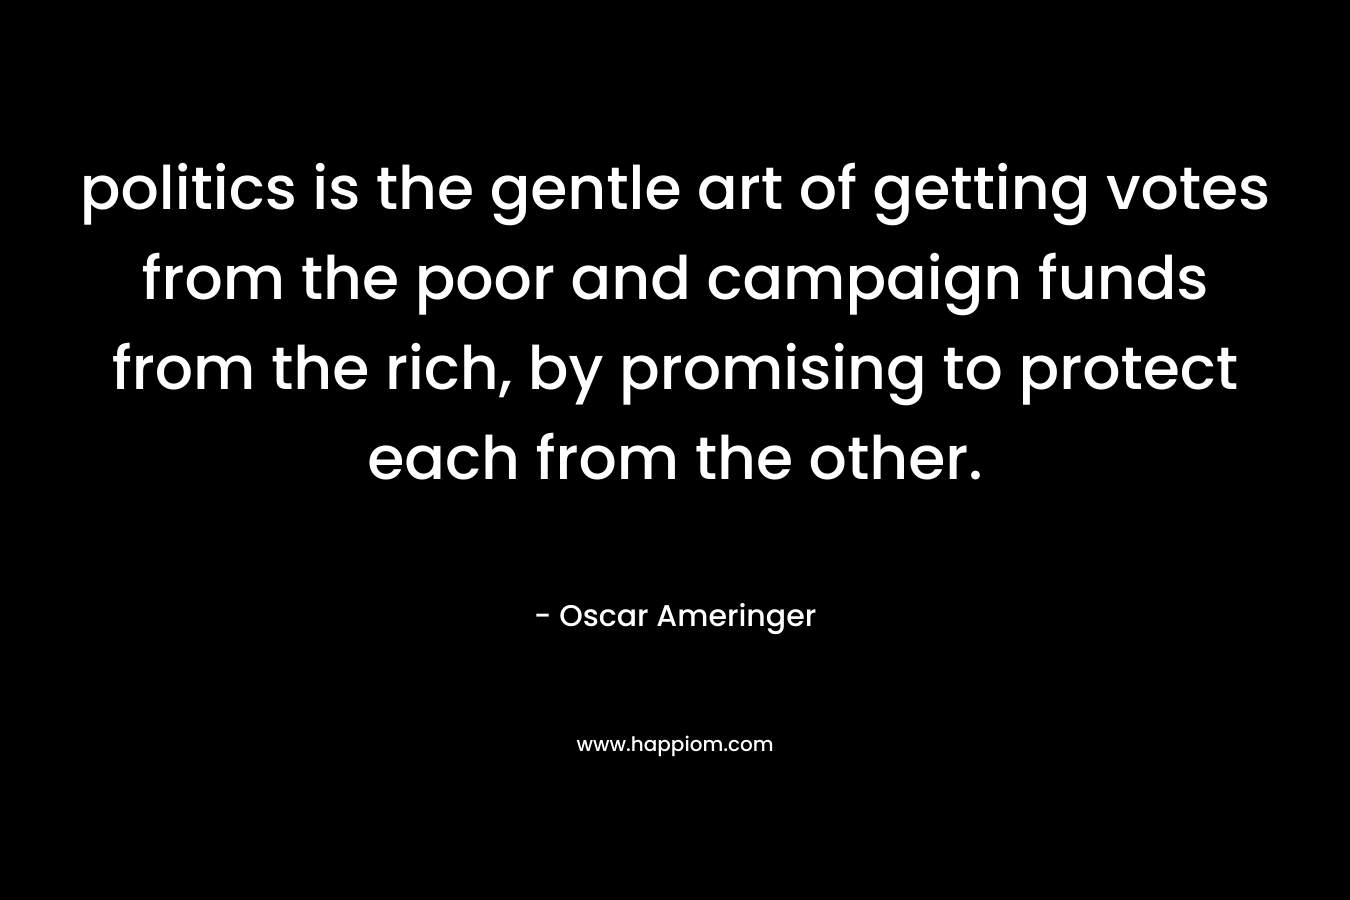 politics is the gentle art of getting votes from the poor and campaign funds from the rich, by promising to protect each from the other.